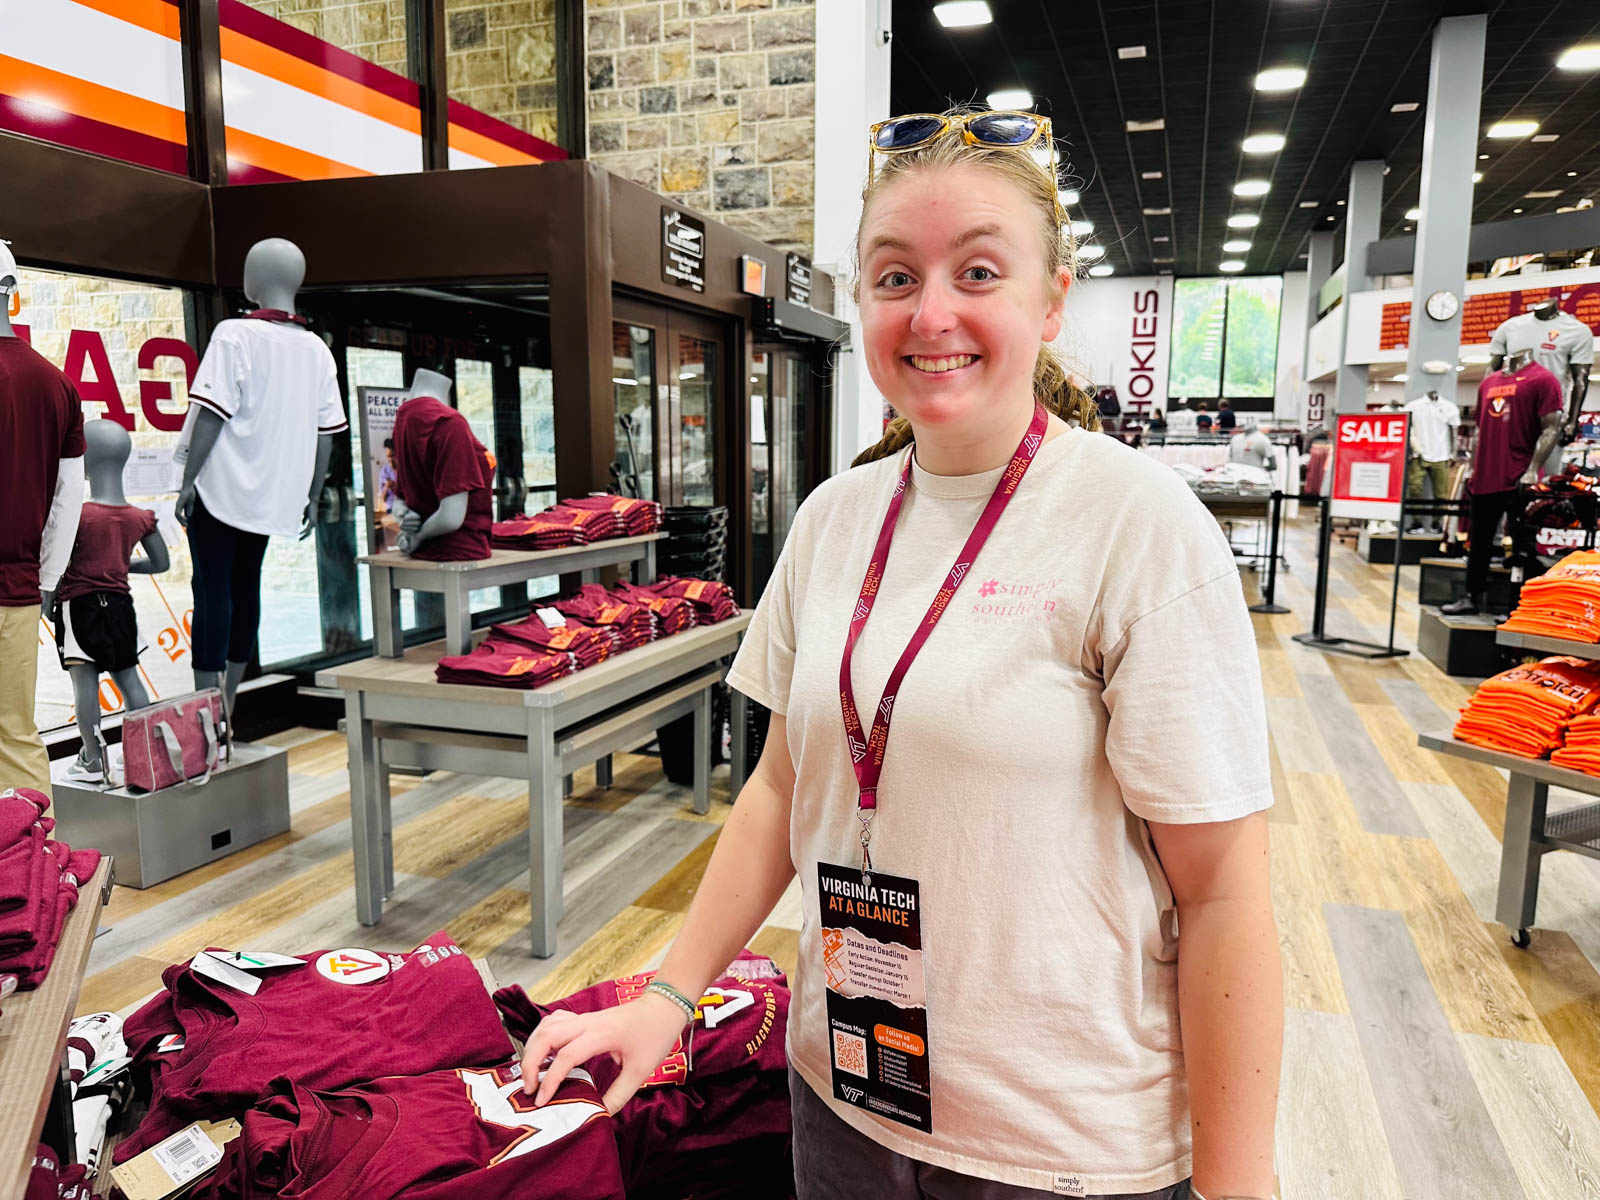 A prospective student visits the Virginia Tech bookstore.